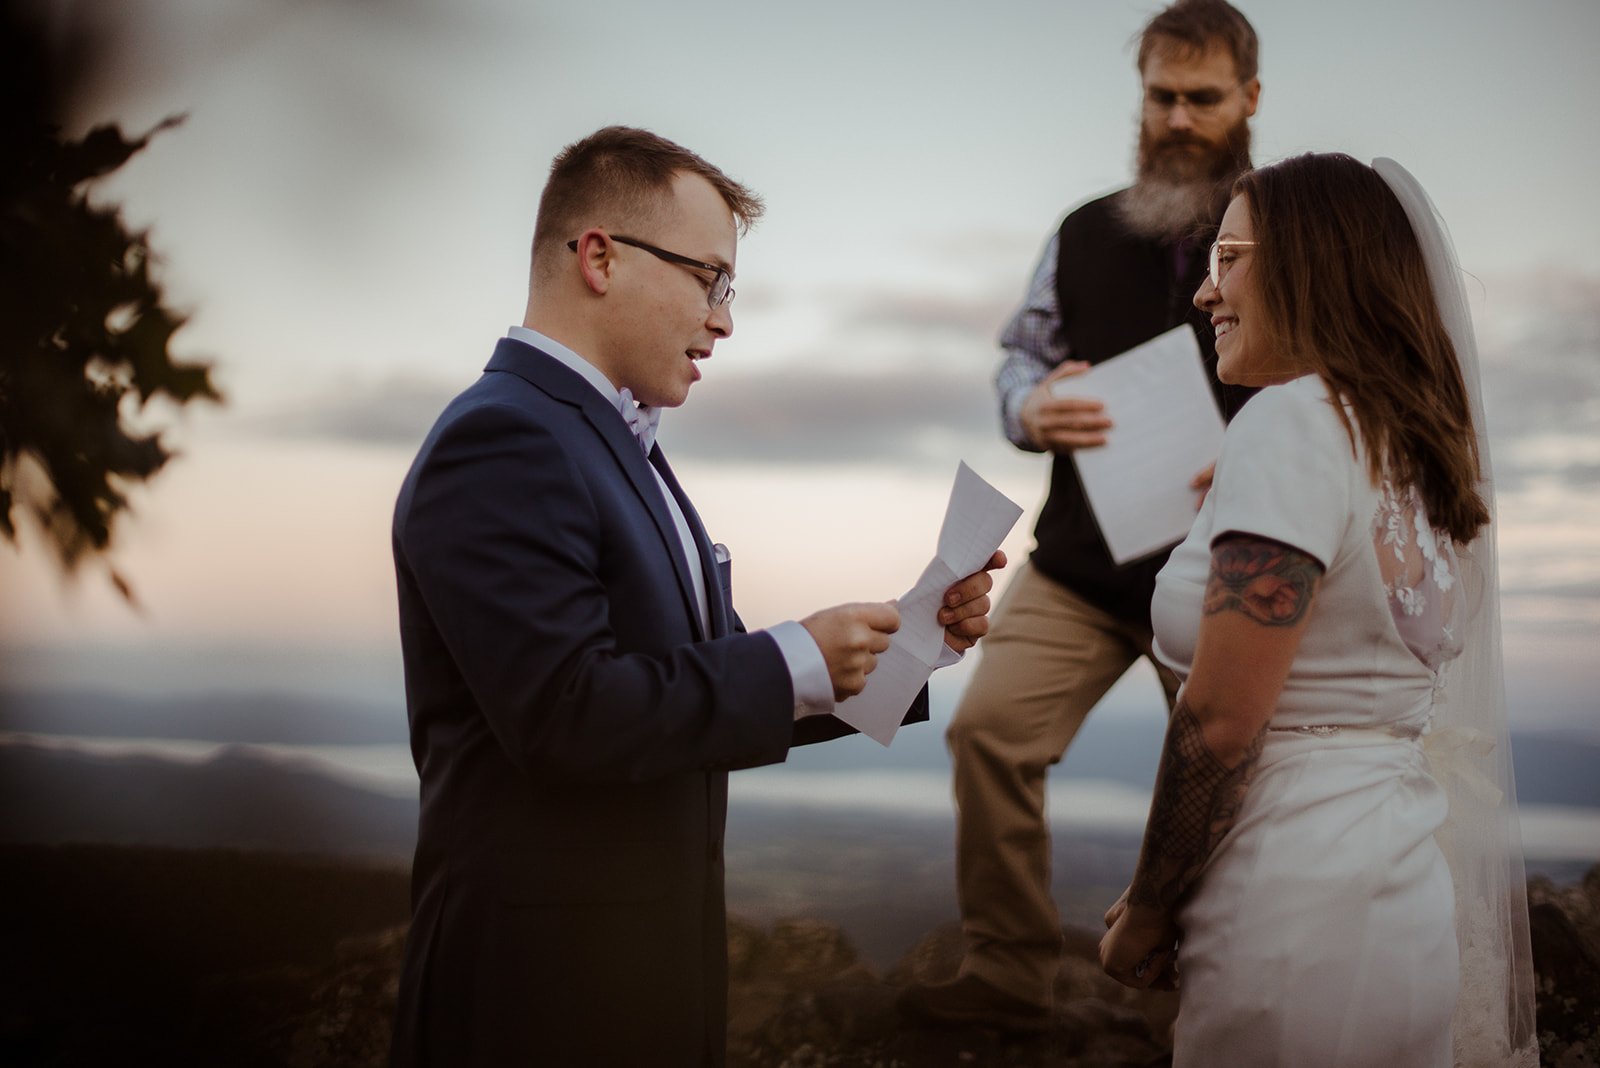 Shenandoah National Park Hiking Elopement with Guests - White Sails Creative_25.jpg